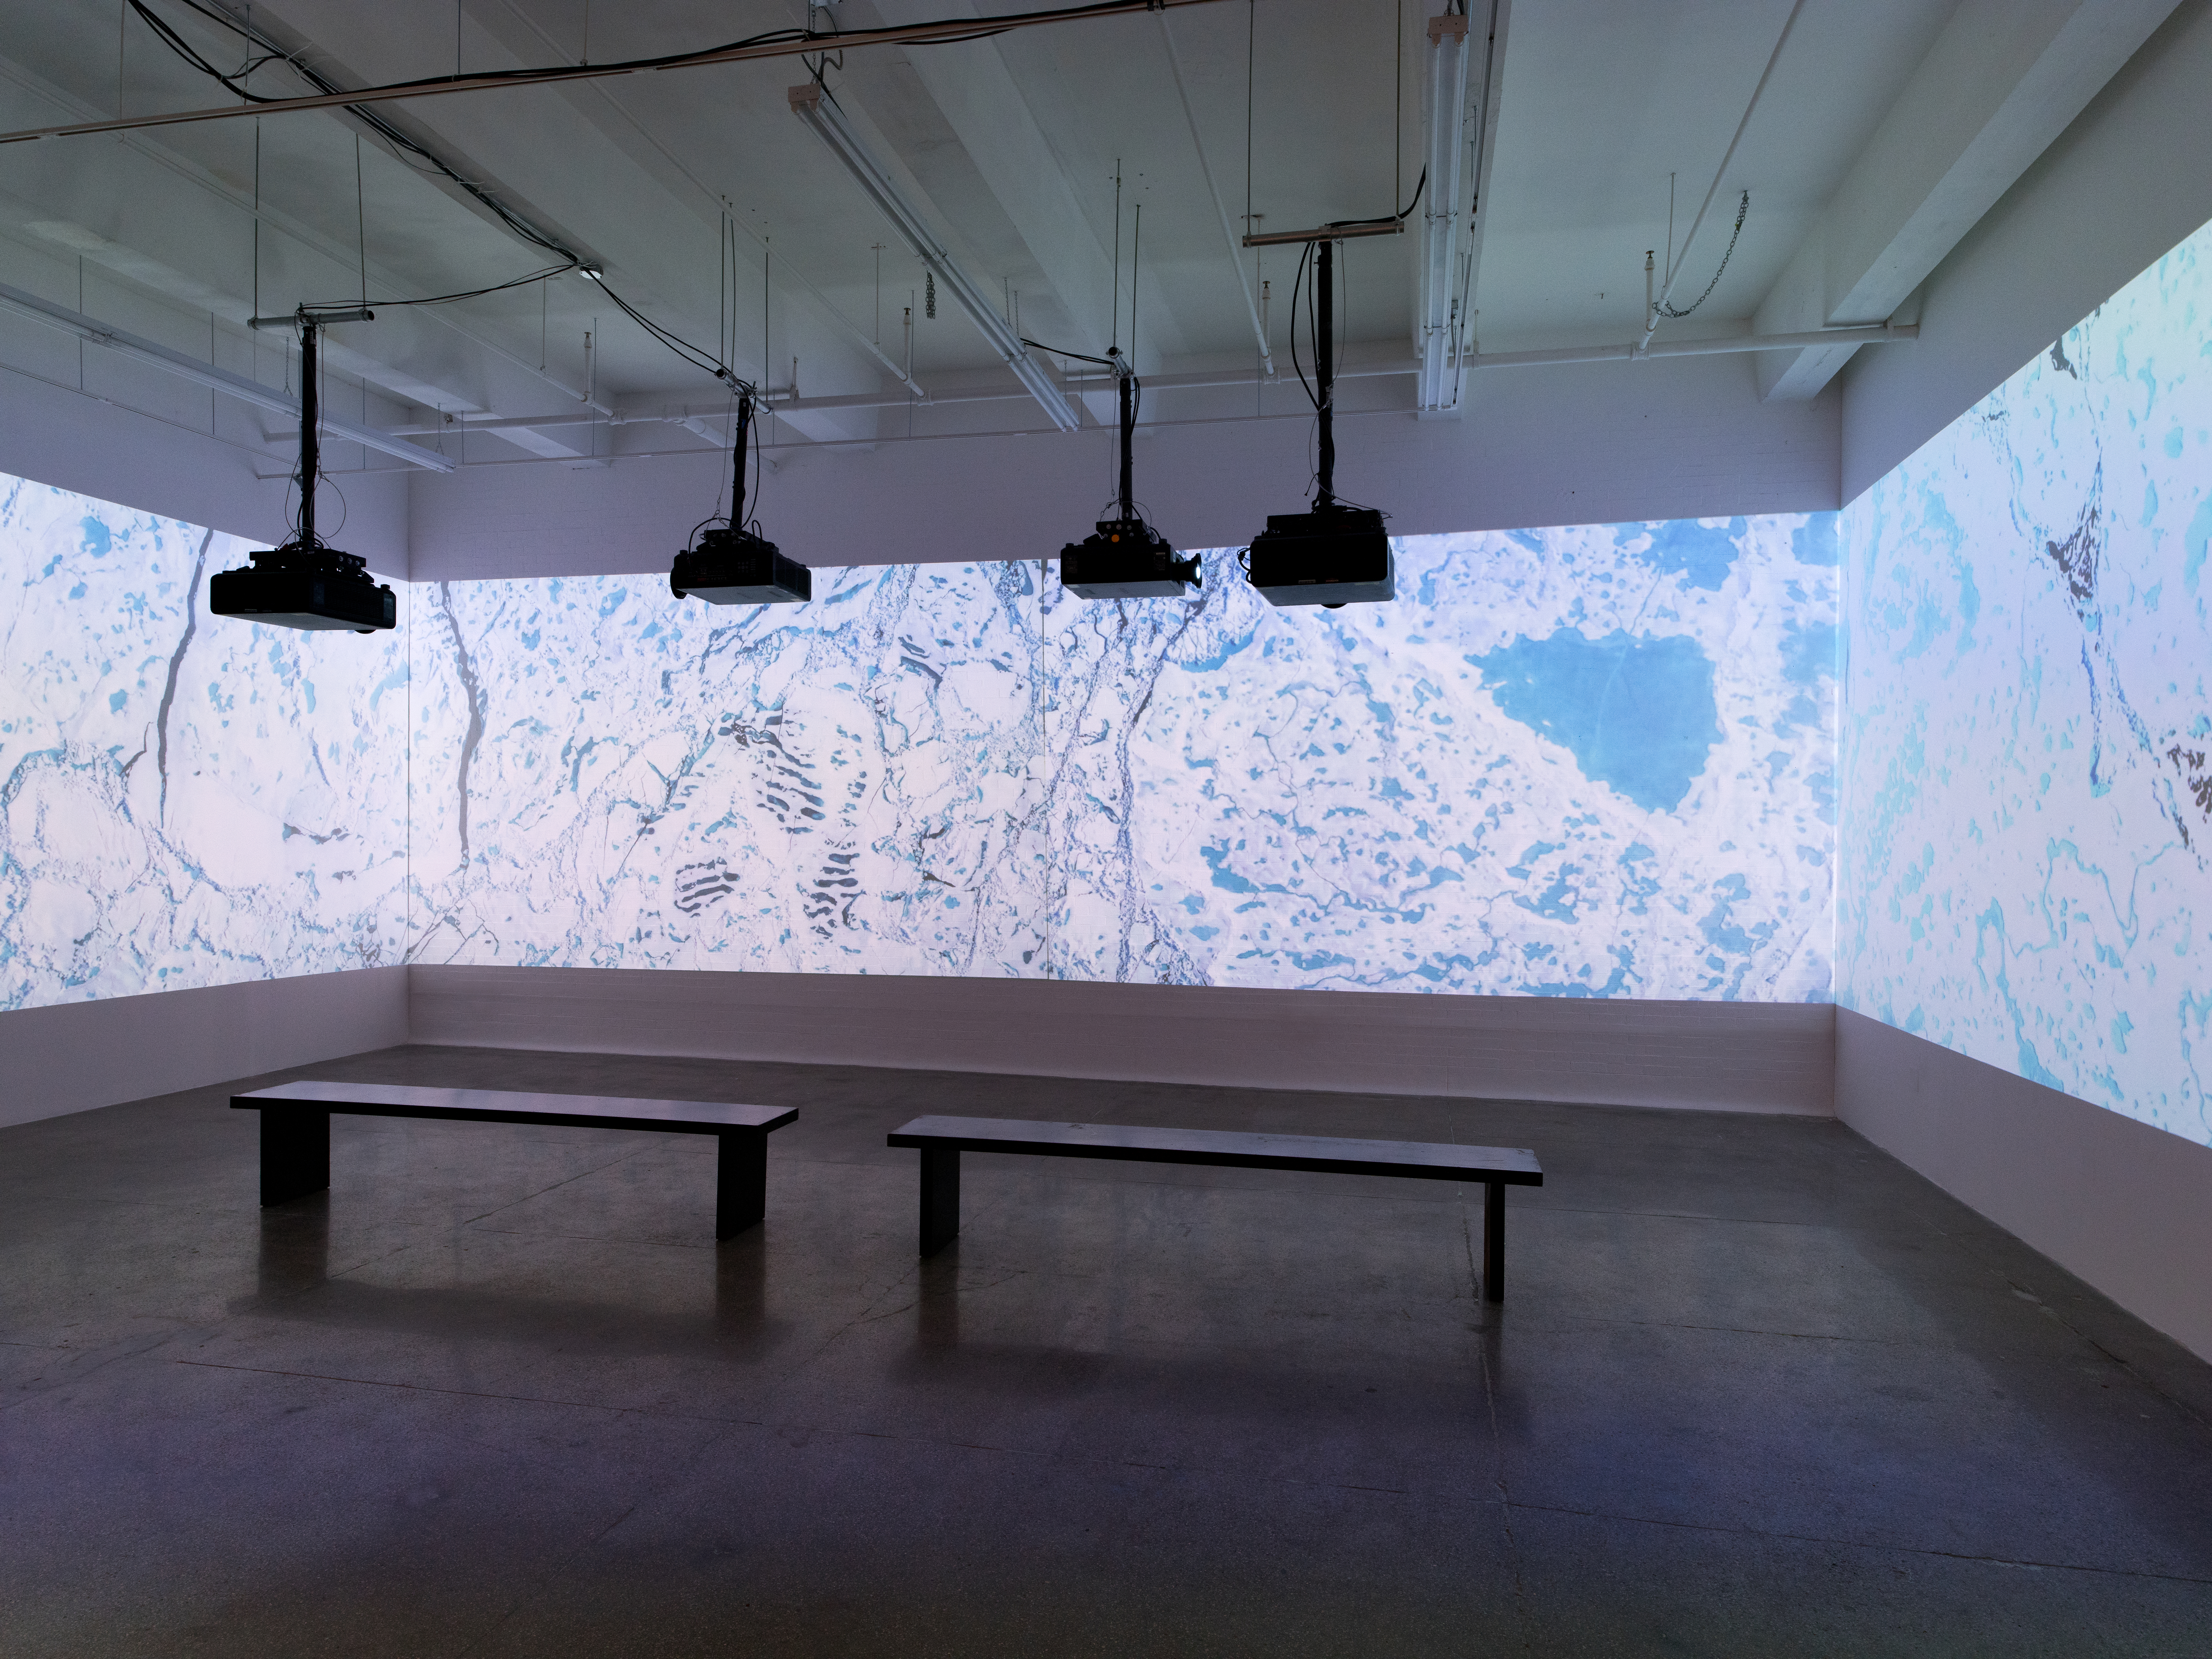 Installation at Mana Contemporary, Implied Scale: Confronting the Enormity of Climate Change